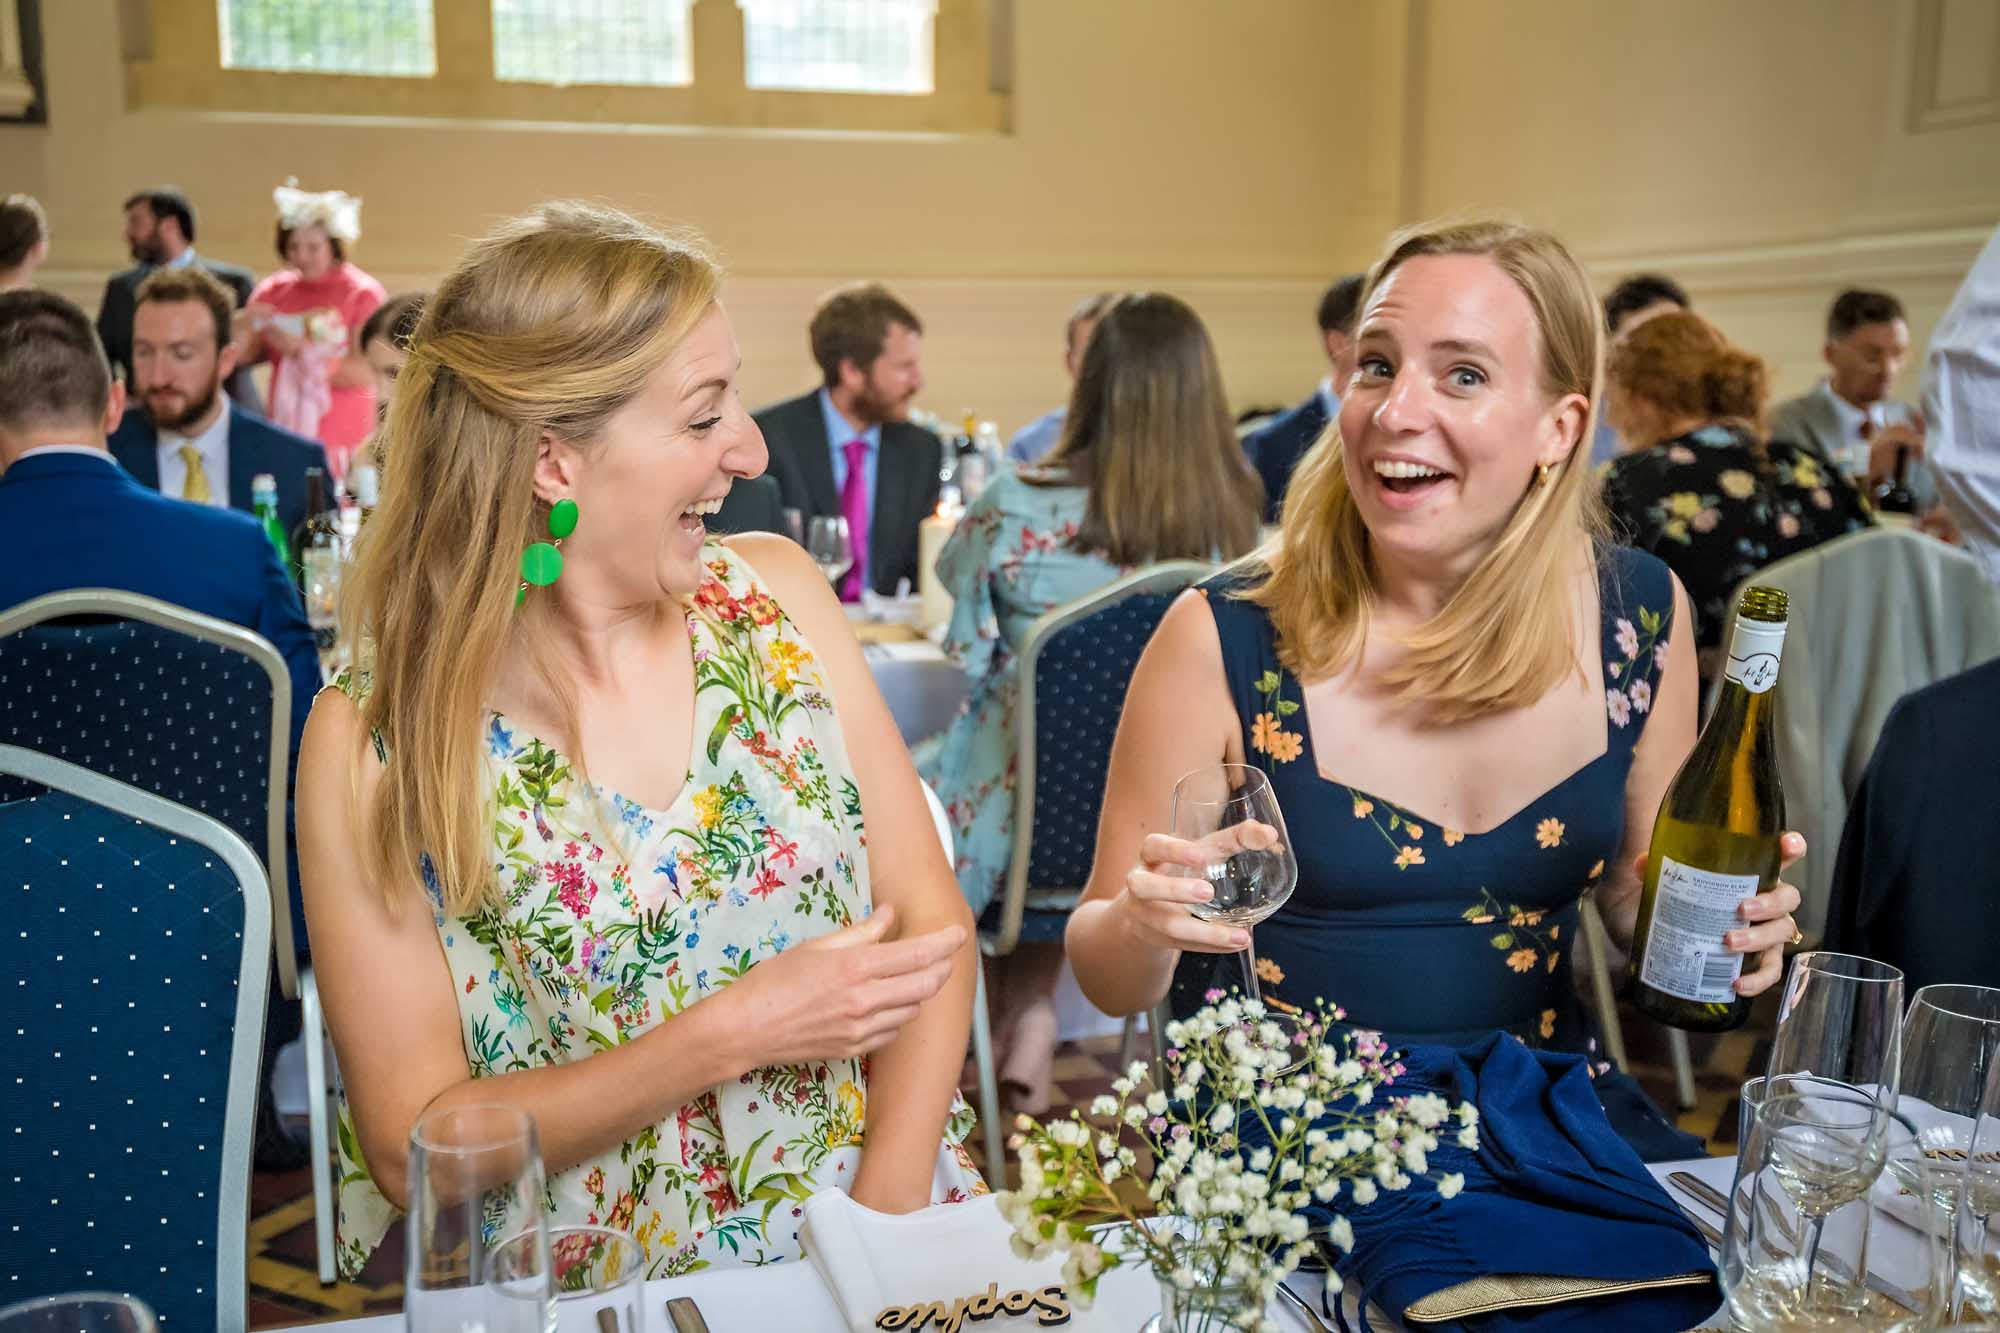 Two women laughing with bottle of wine at wedding breakfast